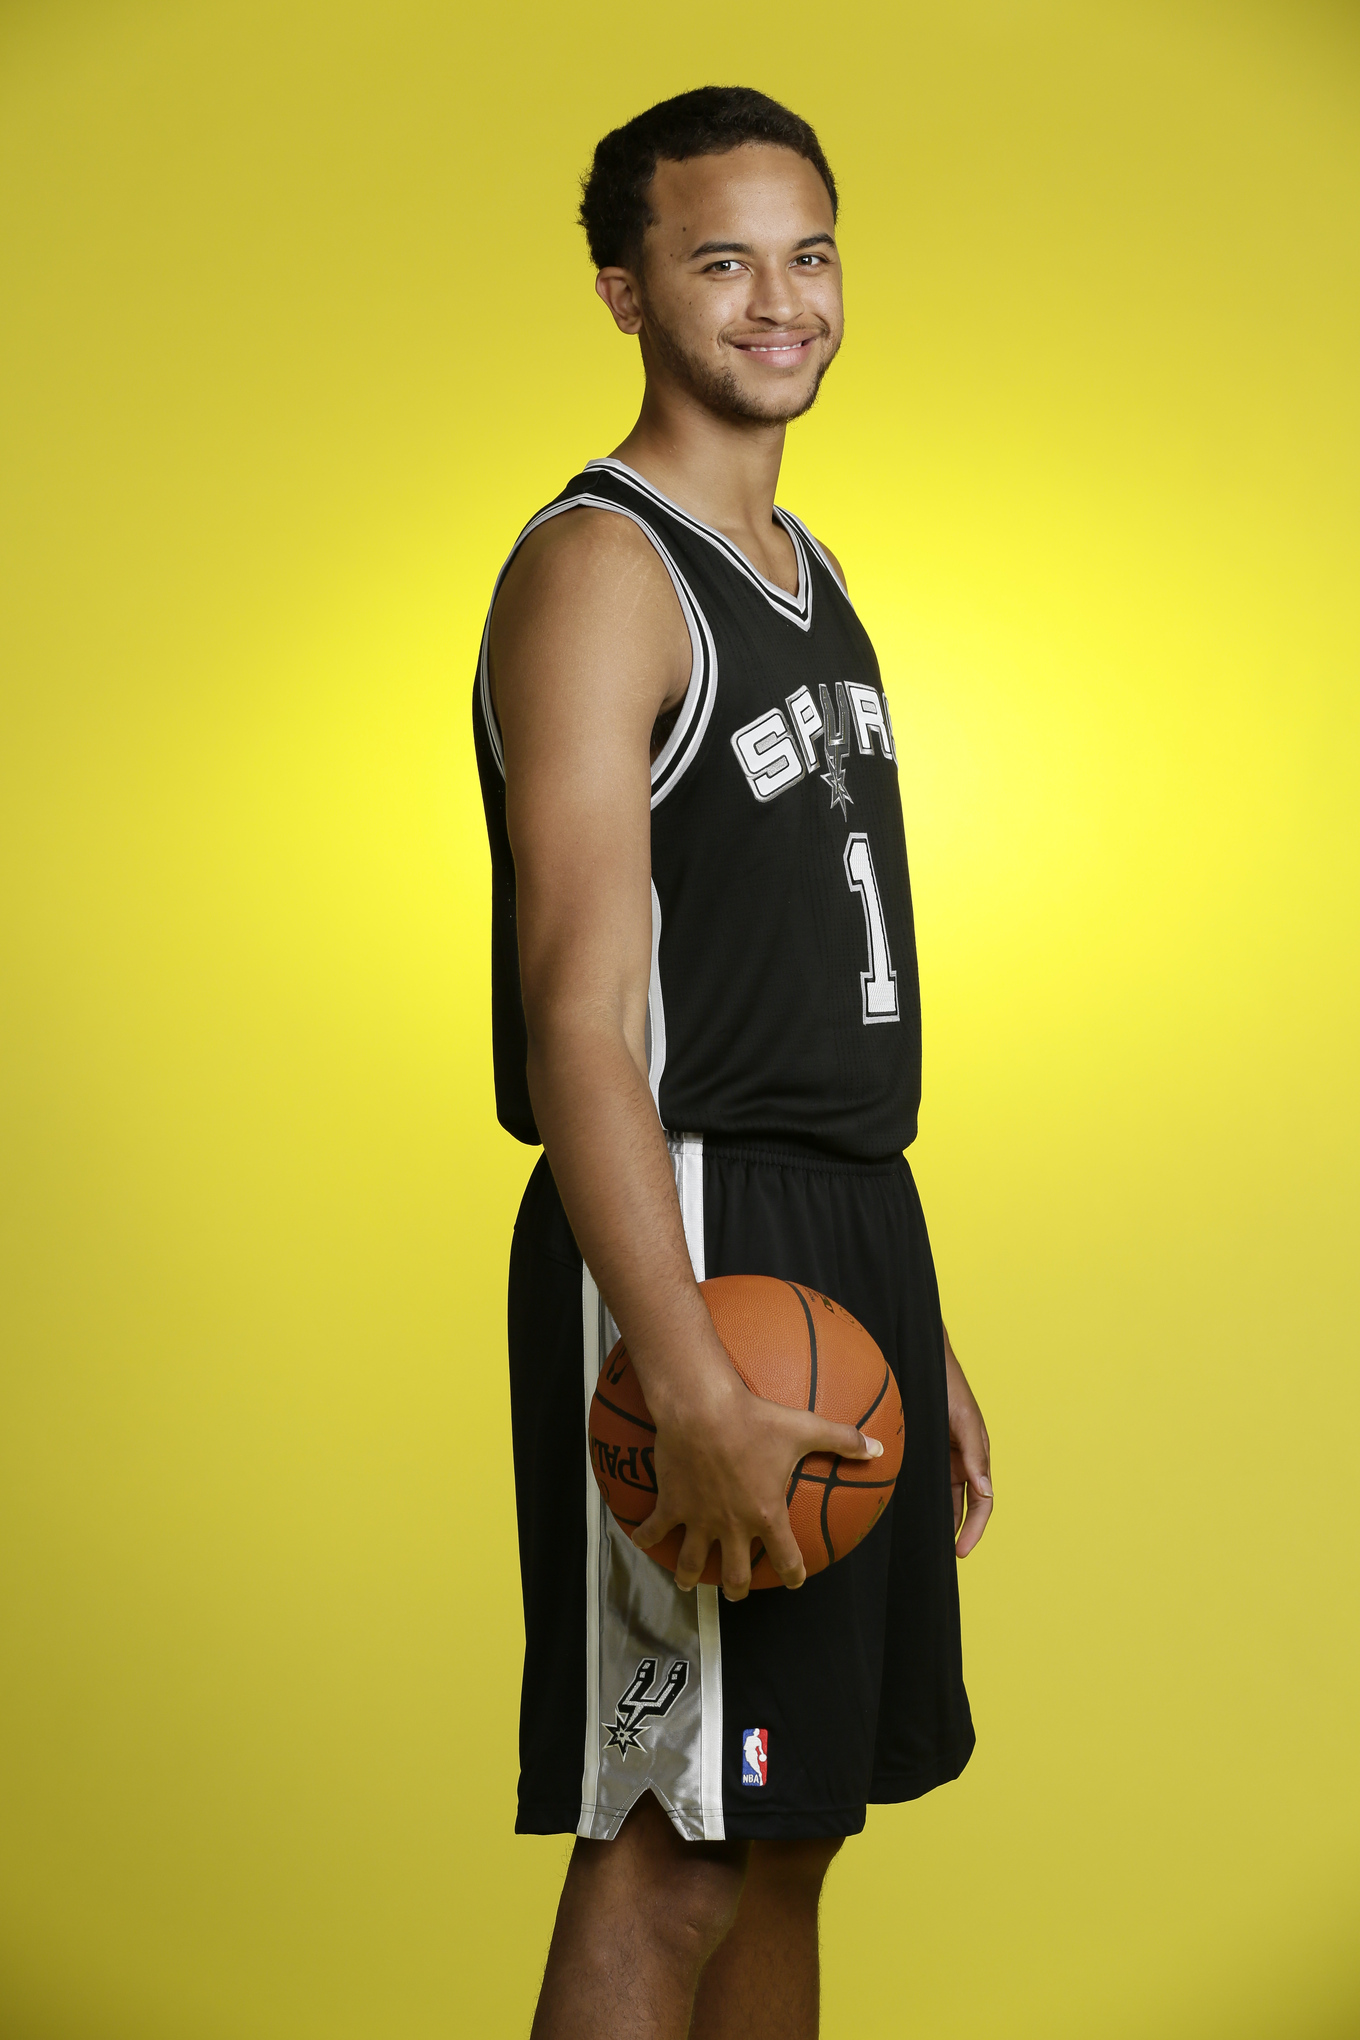 Kyle-anderson-nba-rookie-day-14